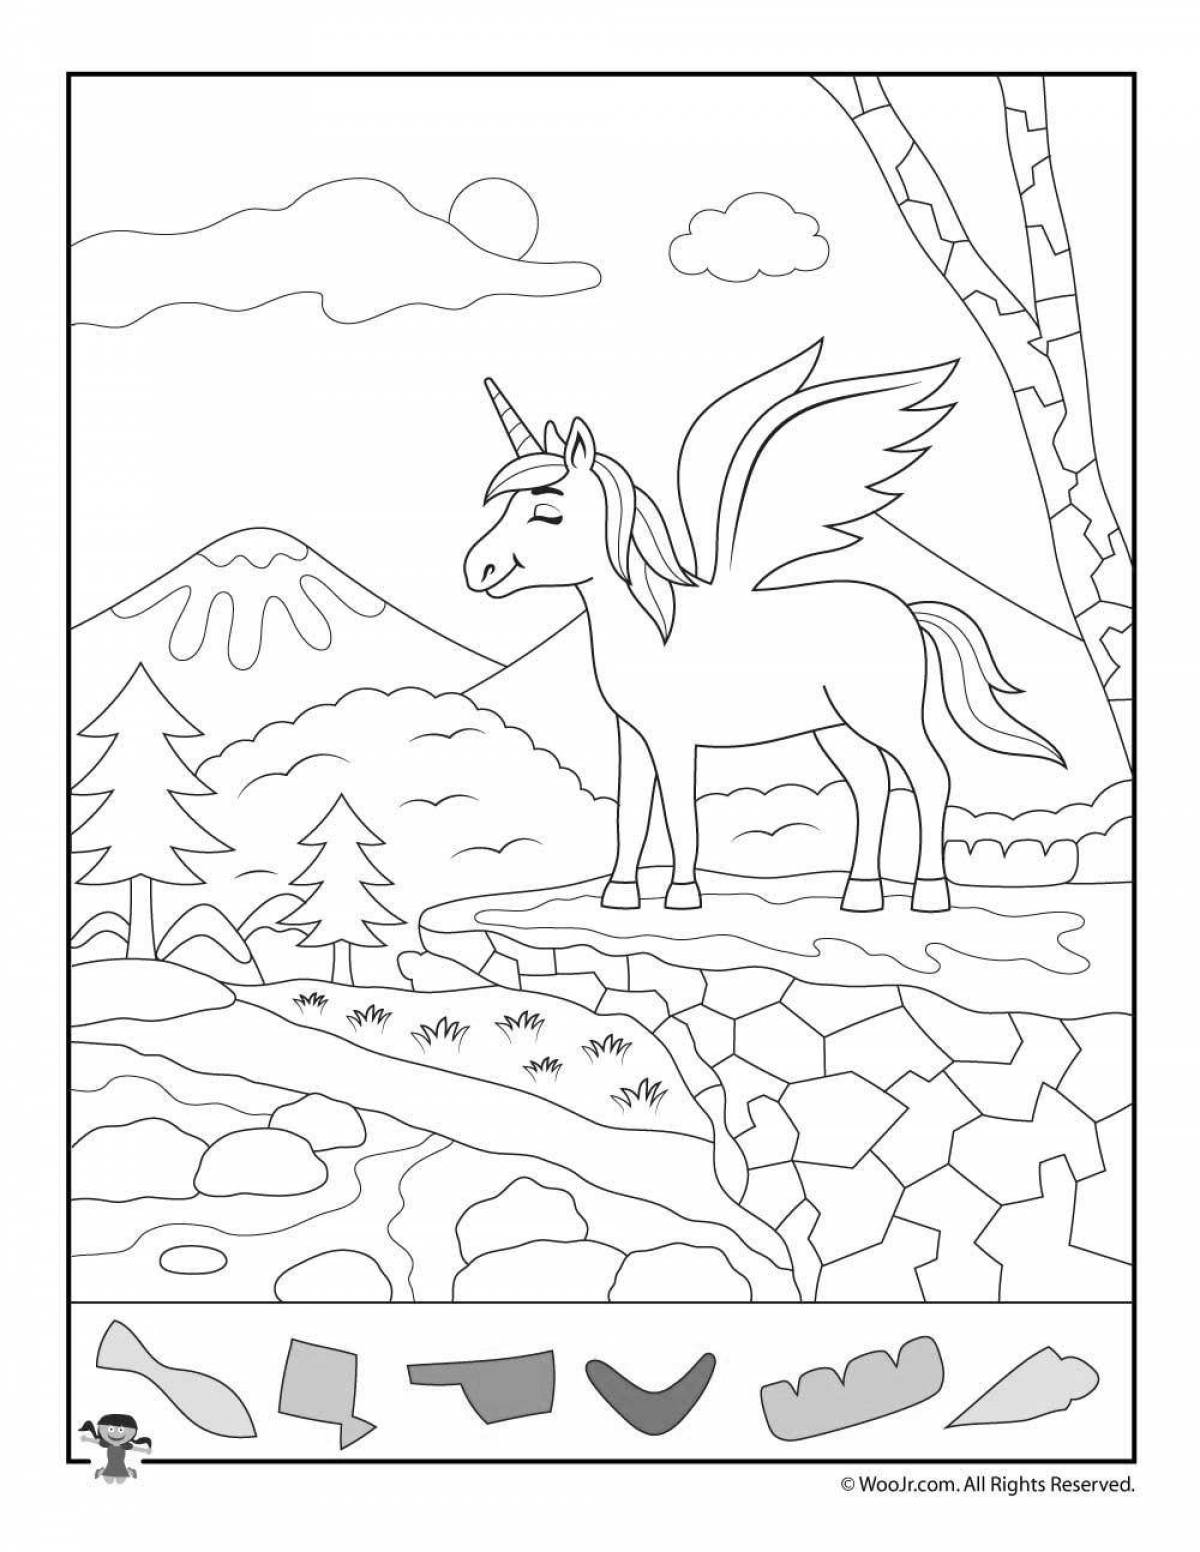 Cute unicorn coloring by numbers for kids